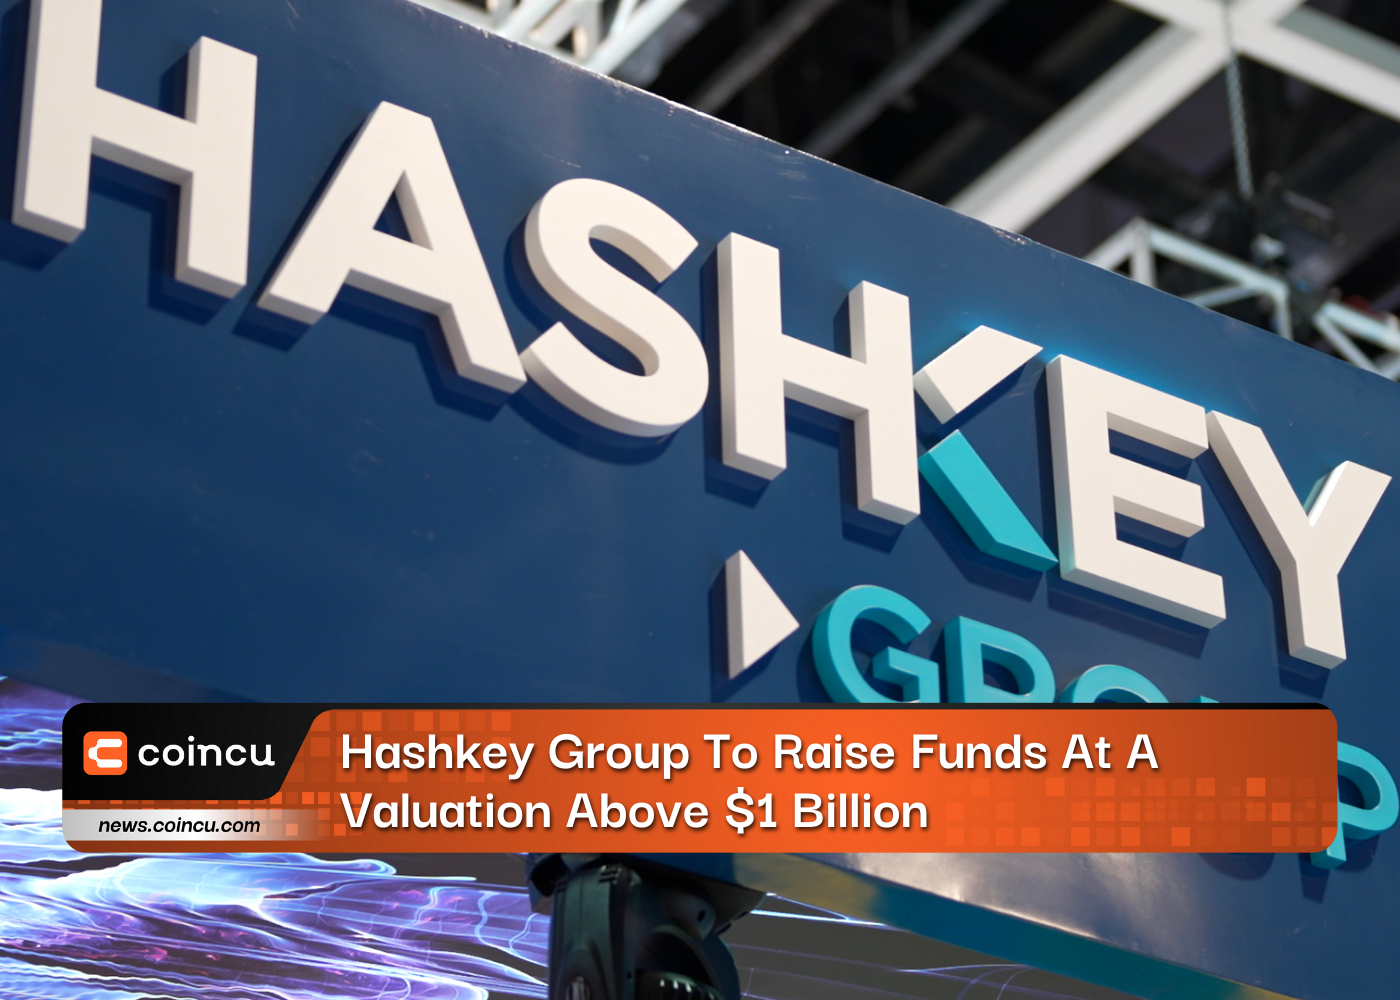 Hashkey Group To Raise Funds At A Valuation Above $1 Billion